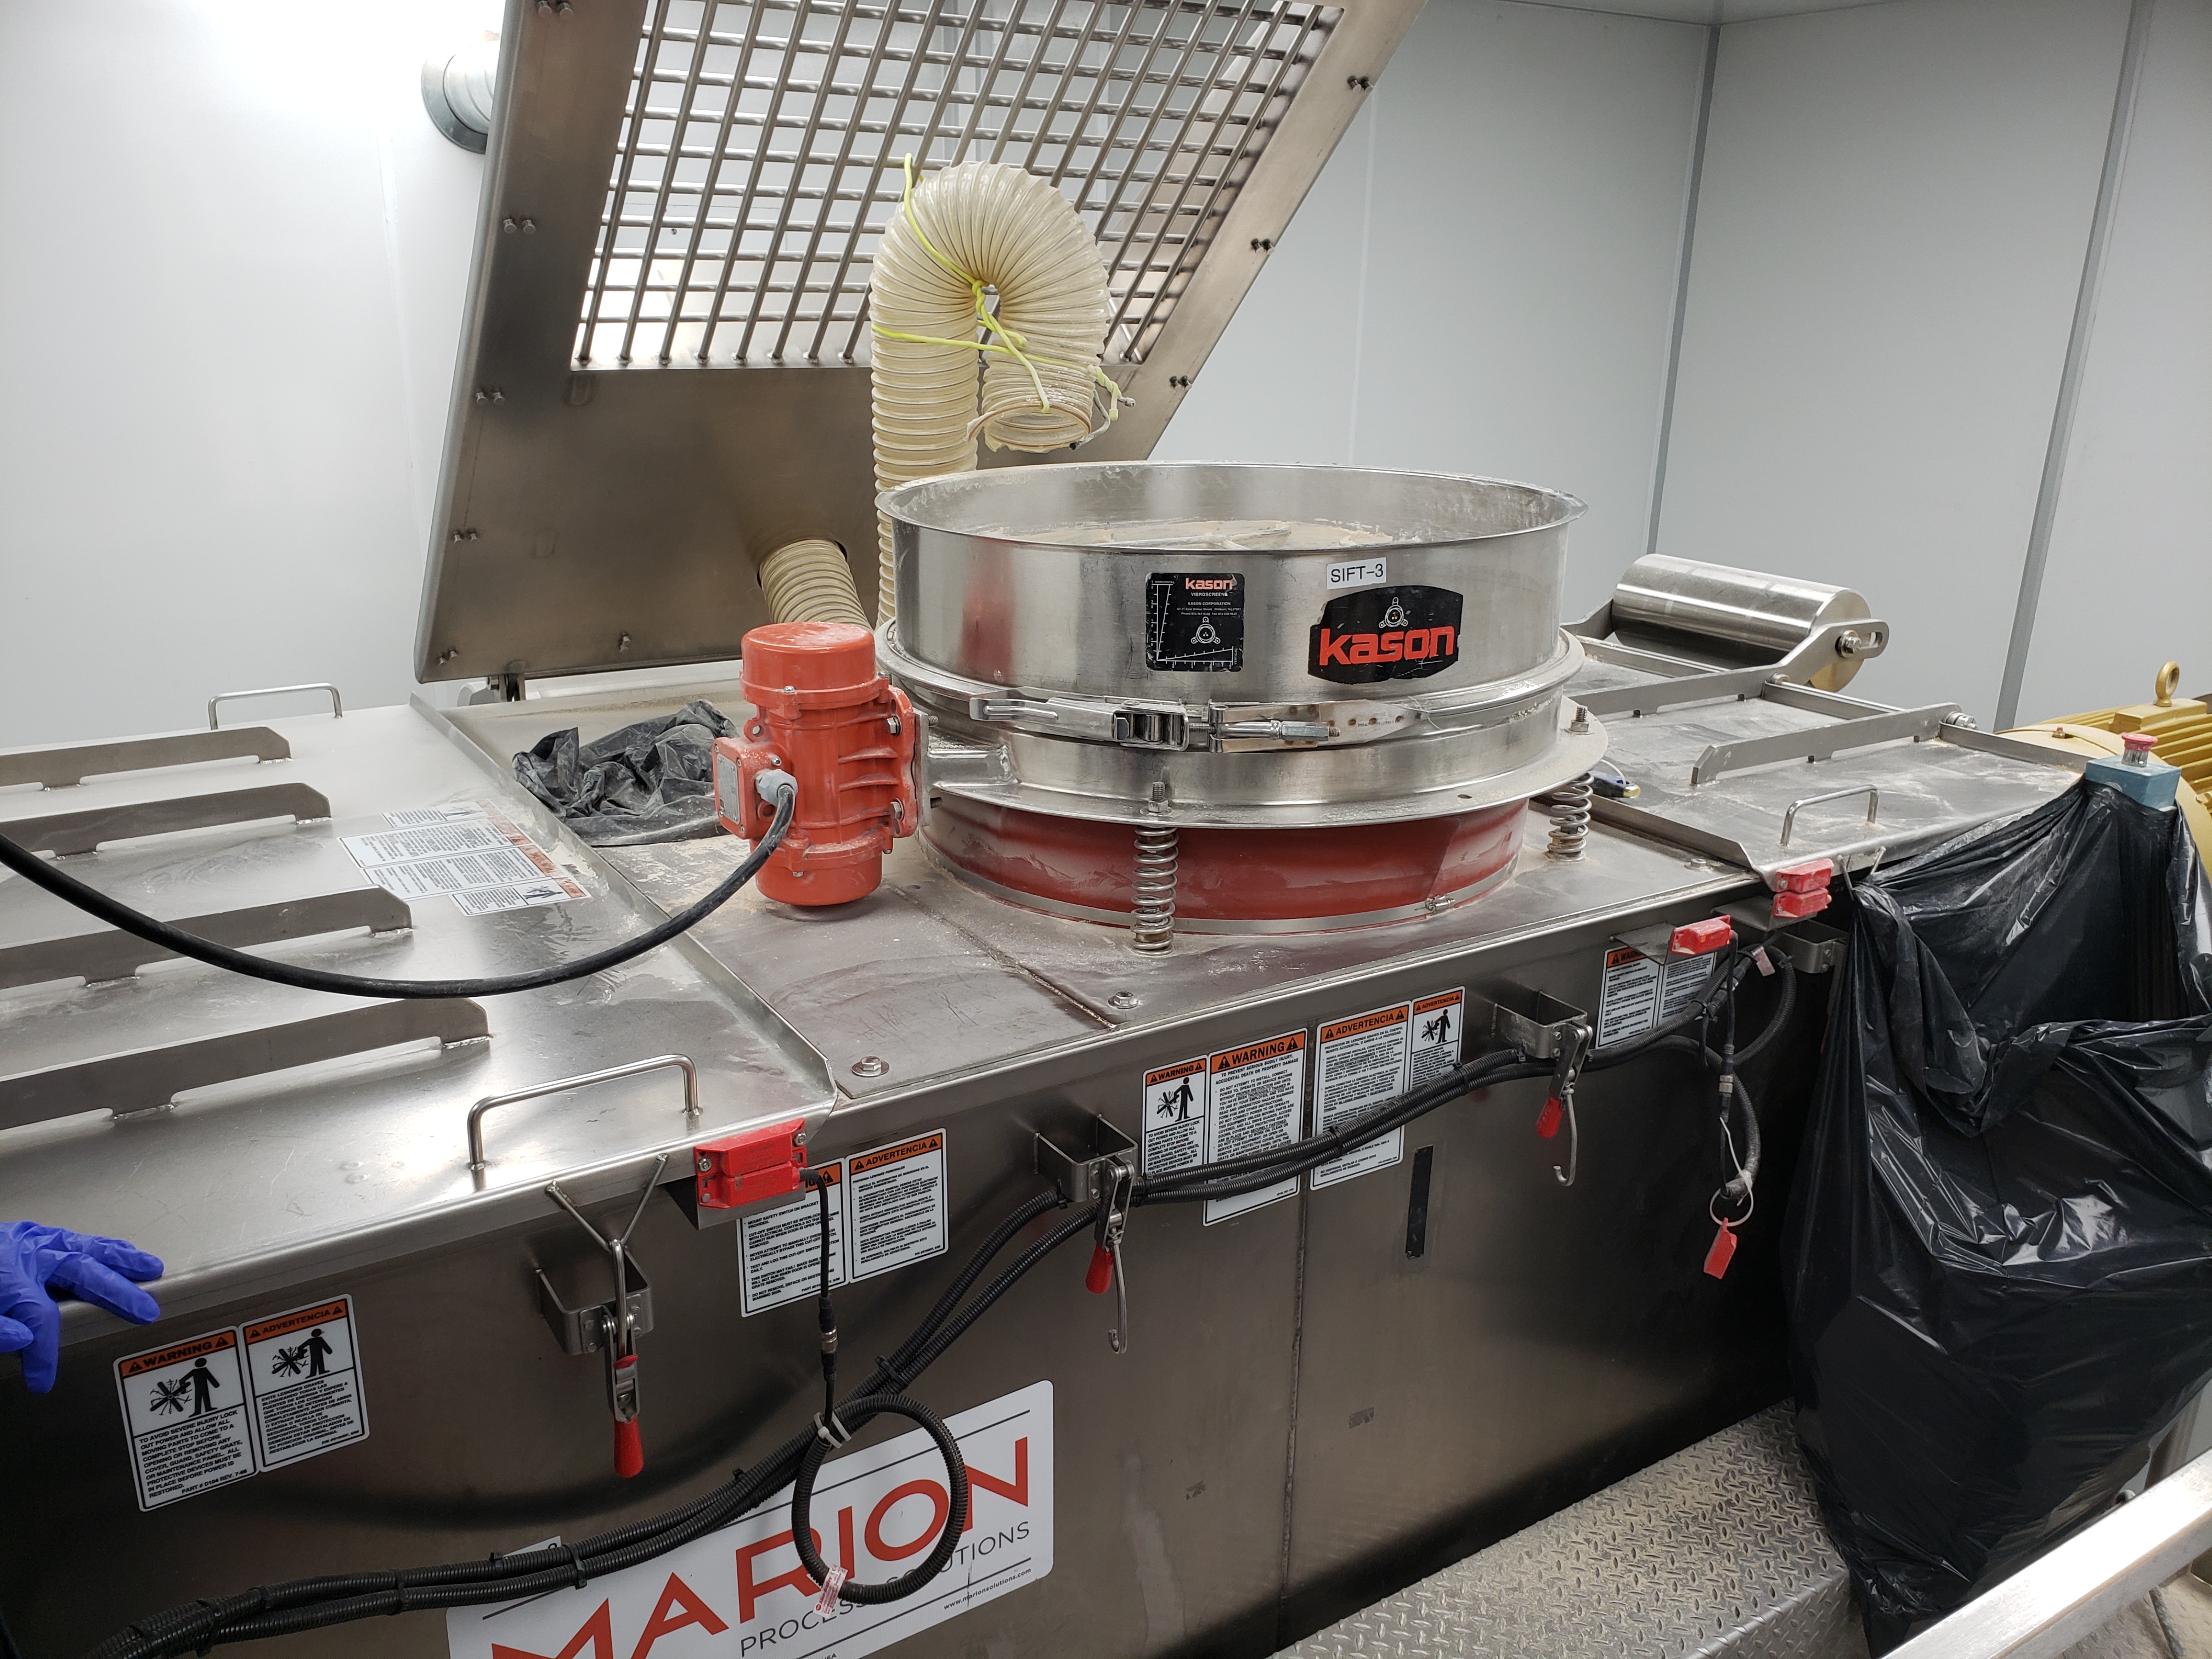 Kason and Marion Combination Creates Perfection for Powders and Tablet Preparation